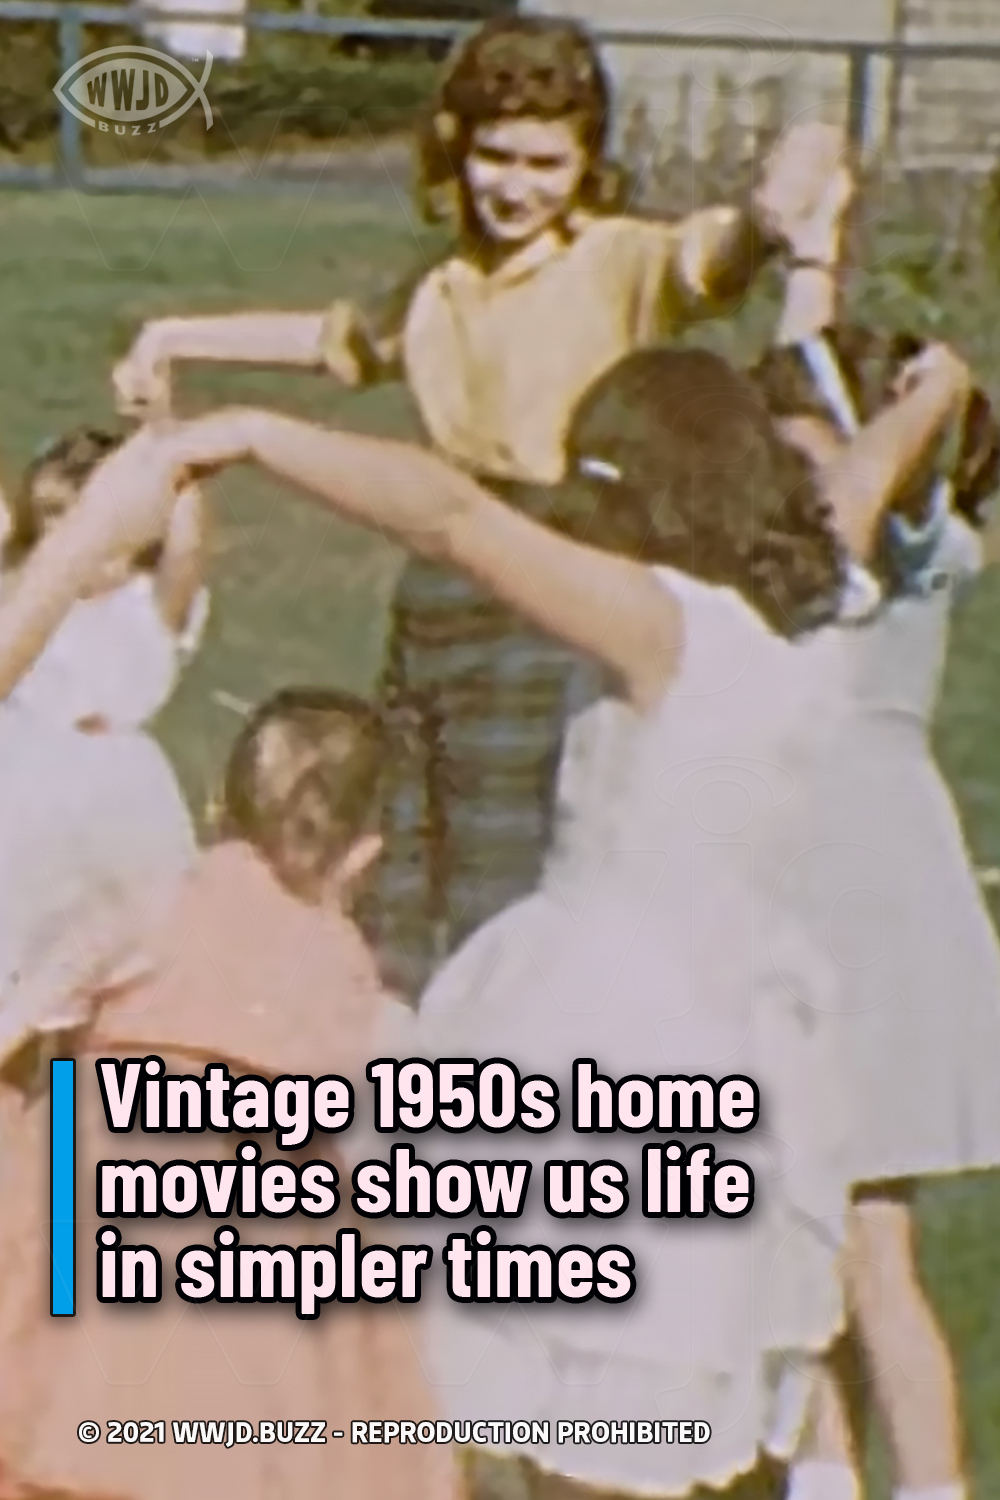 Vintage 1950s home movies show us life in simpler times